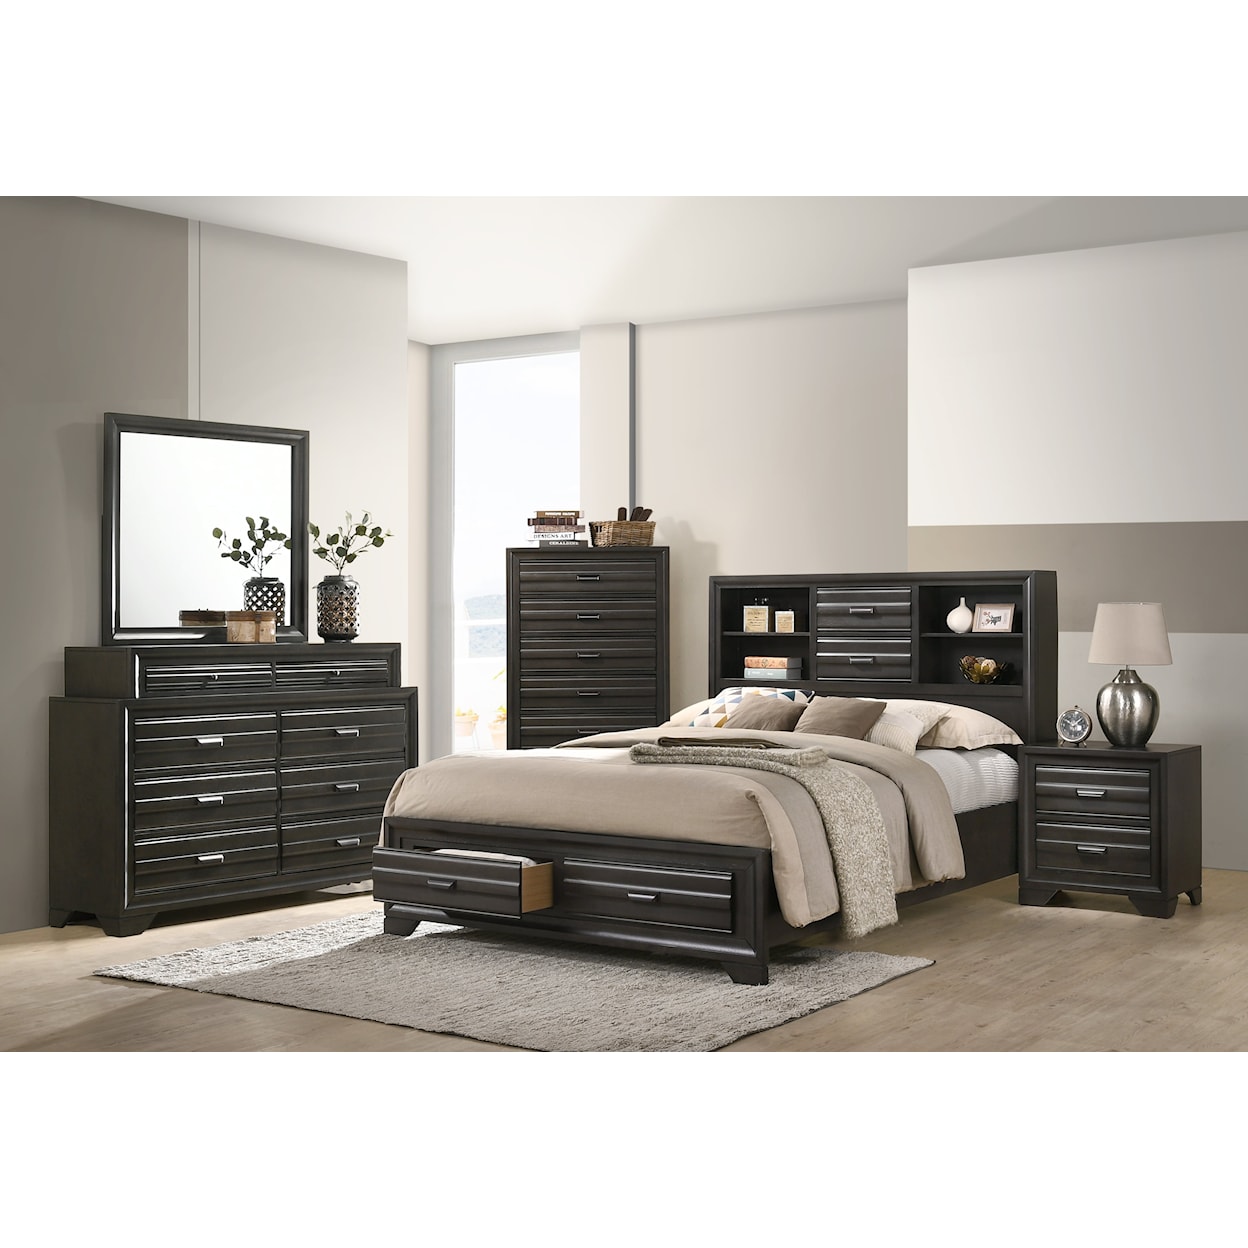 Lifestyle Timmy TIMMY GREY KING BED |